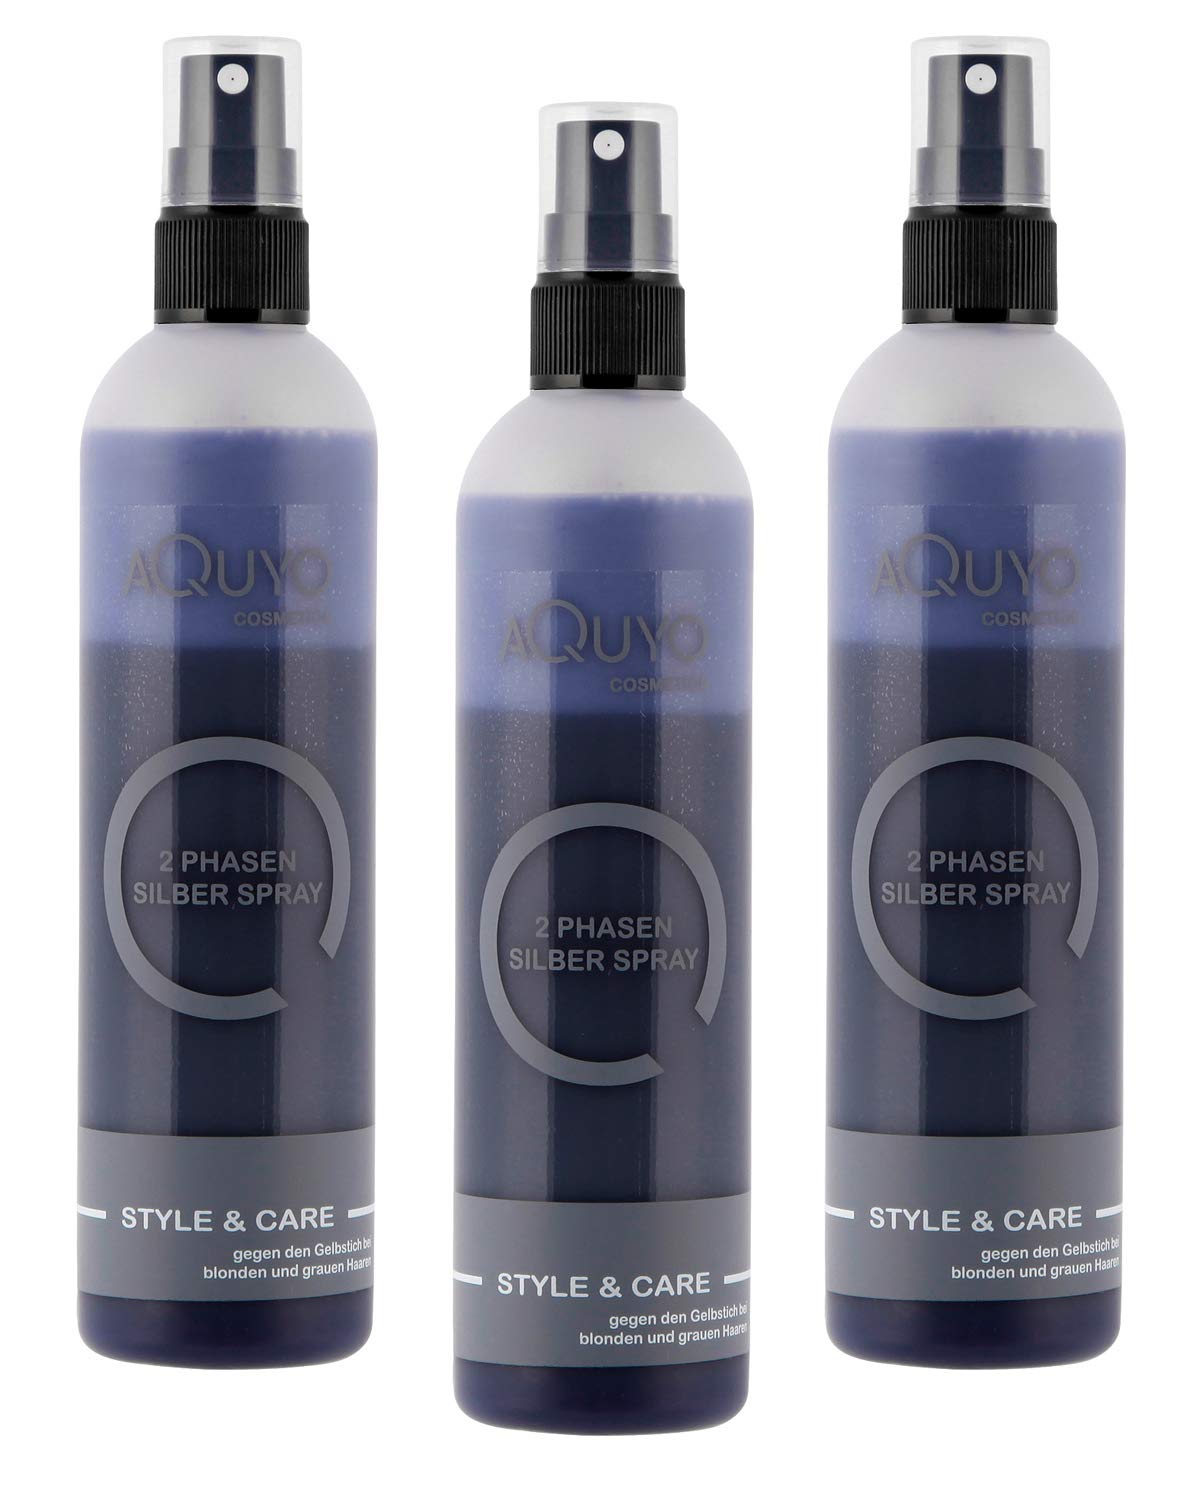 AQUYO Cosmetics Anti-yellowing silver spray for blonde and grey hair (200ml) | 2 phase silver spray conditioner moisturises the hair, gives shine and makes combing easier.